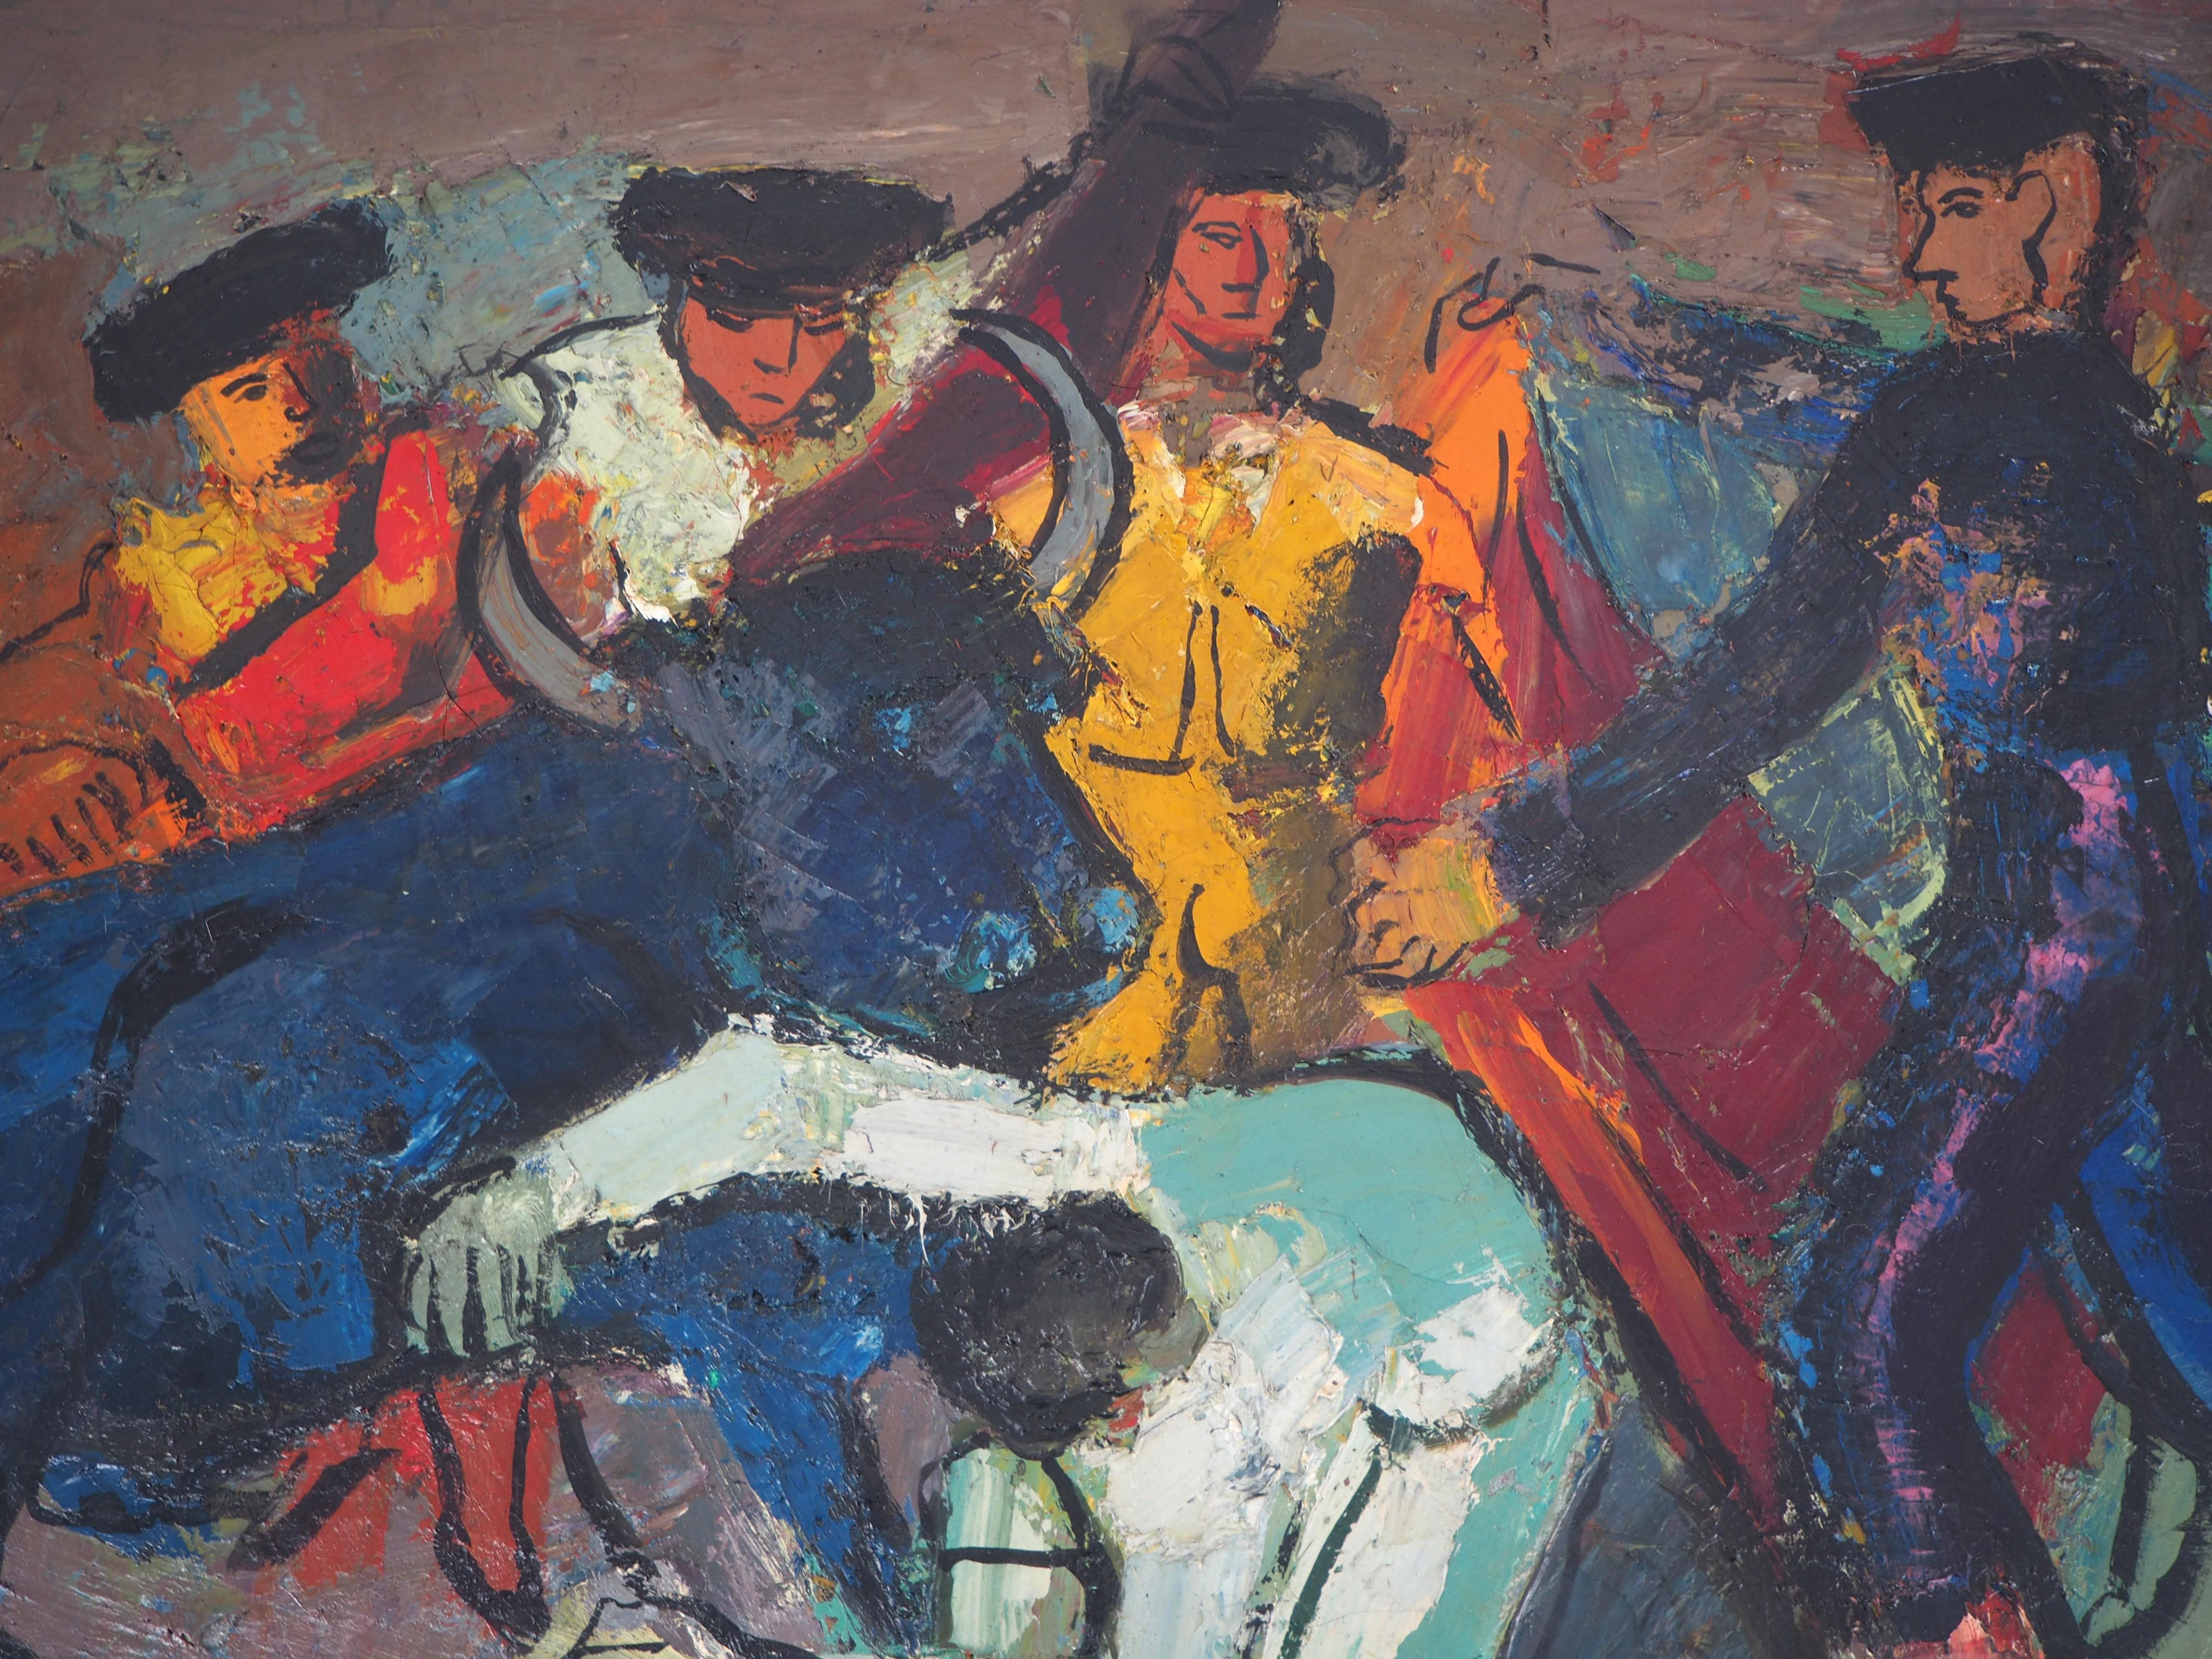 Torero and Bull Entrance - Tall original oil on canvas, Signed and Framed - Fauvist Painting by Pierre Ambrogiani